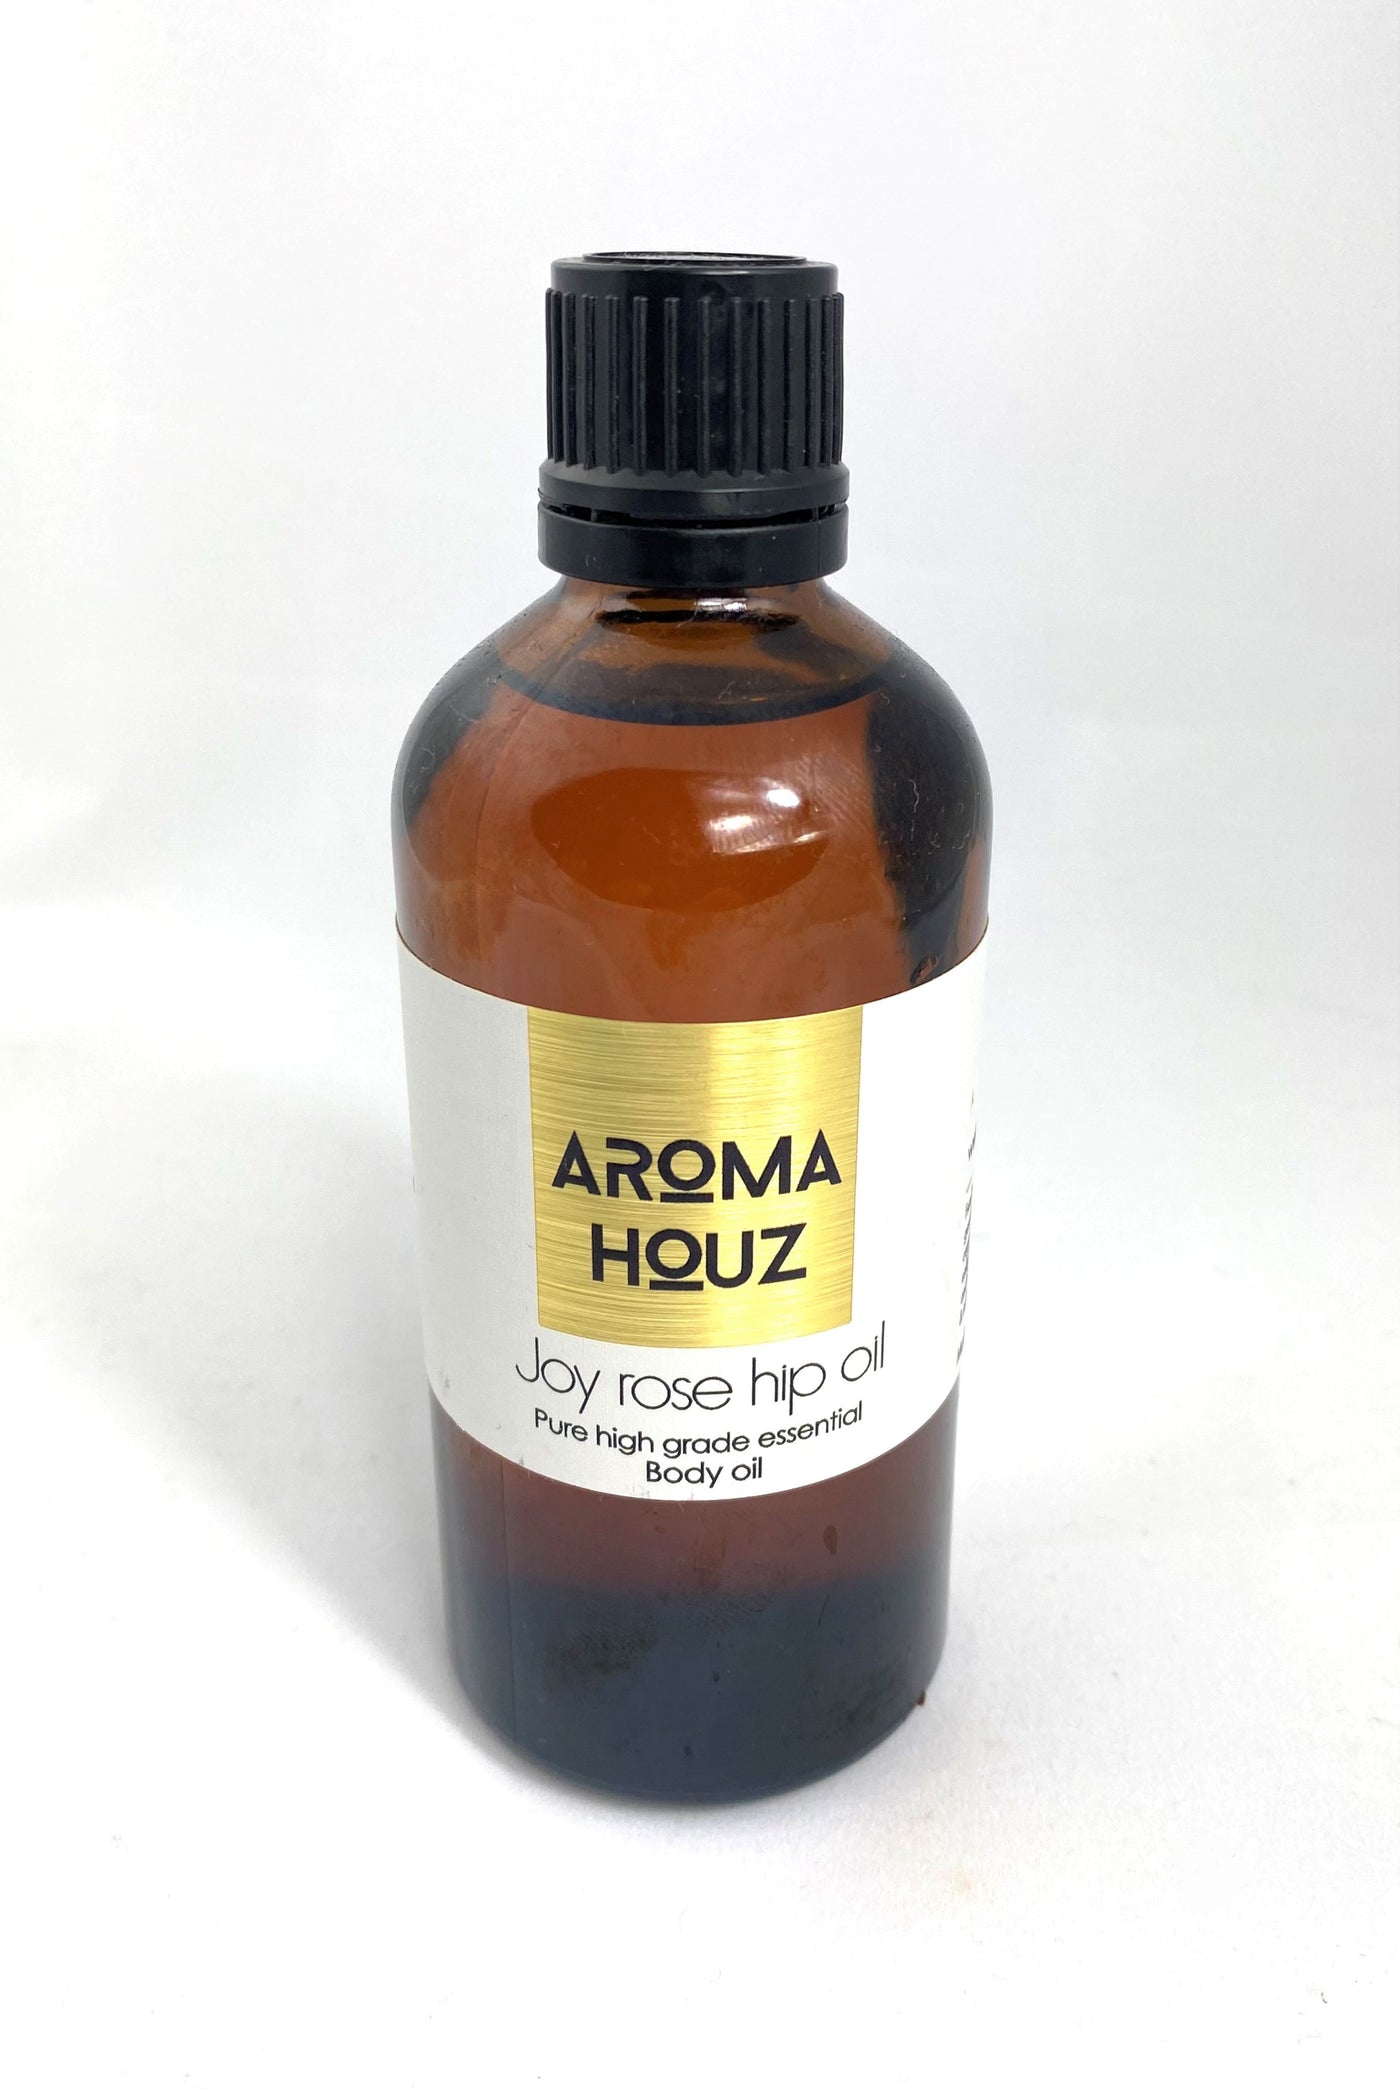 Organic Rose Hip Infused With Pure Essential Oils - Aroma Houz